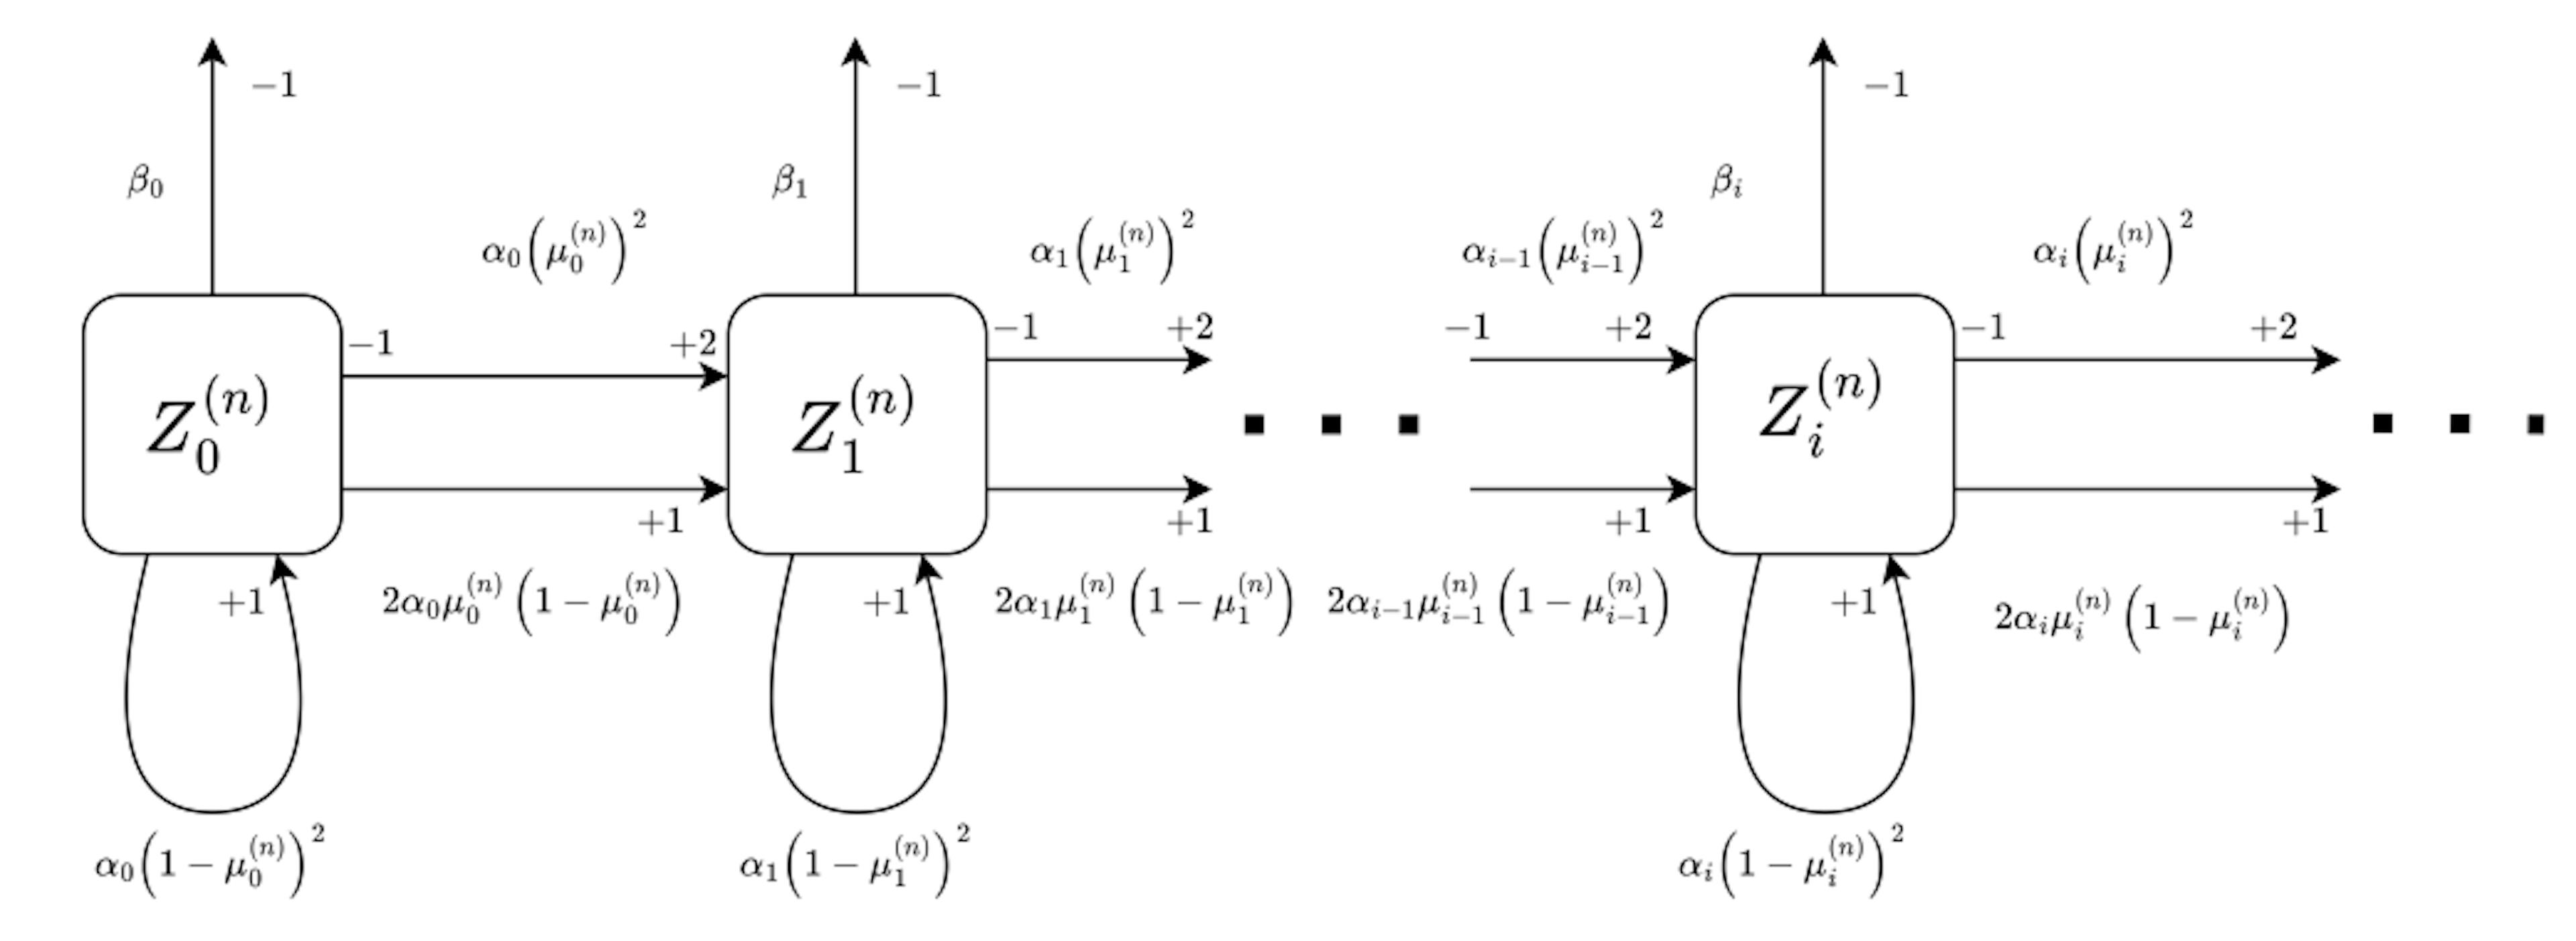 Figure 5: Dynamical representation of the infinite mono-directional graph